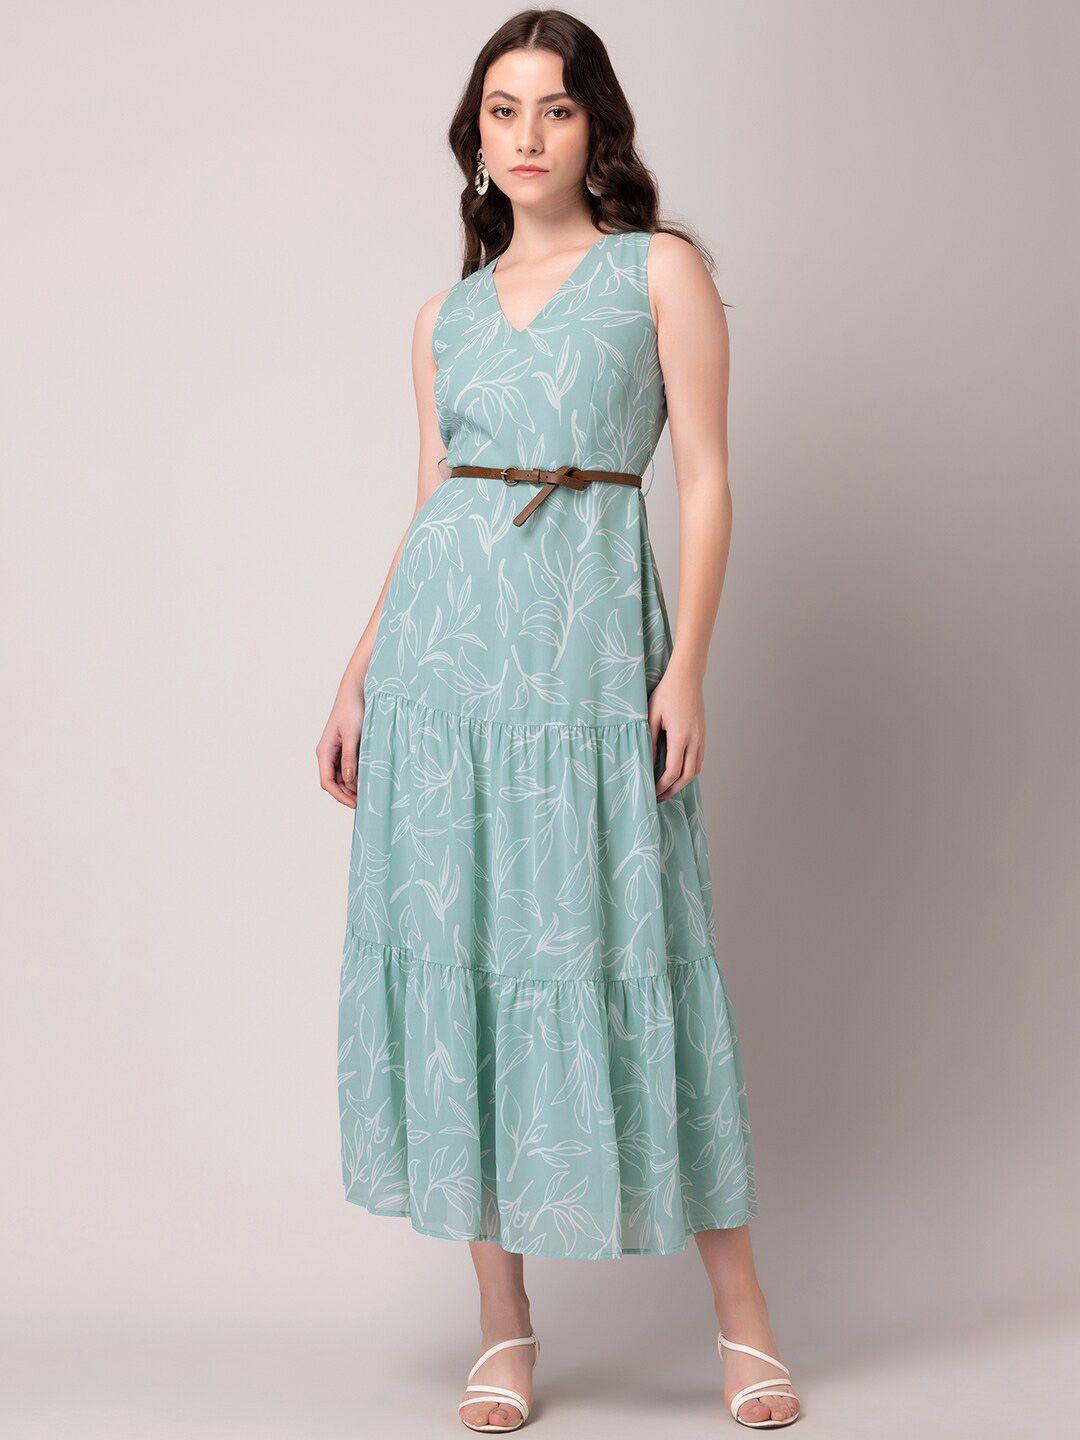 faballey-blue-floral-printed-tiered-a-line-midi-dress-with-belt